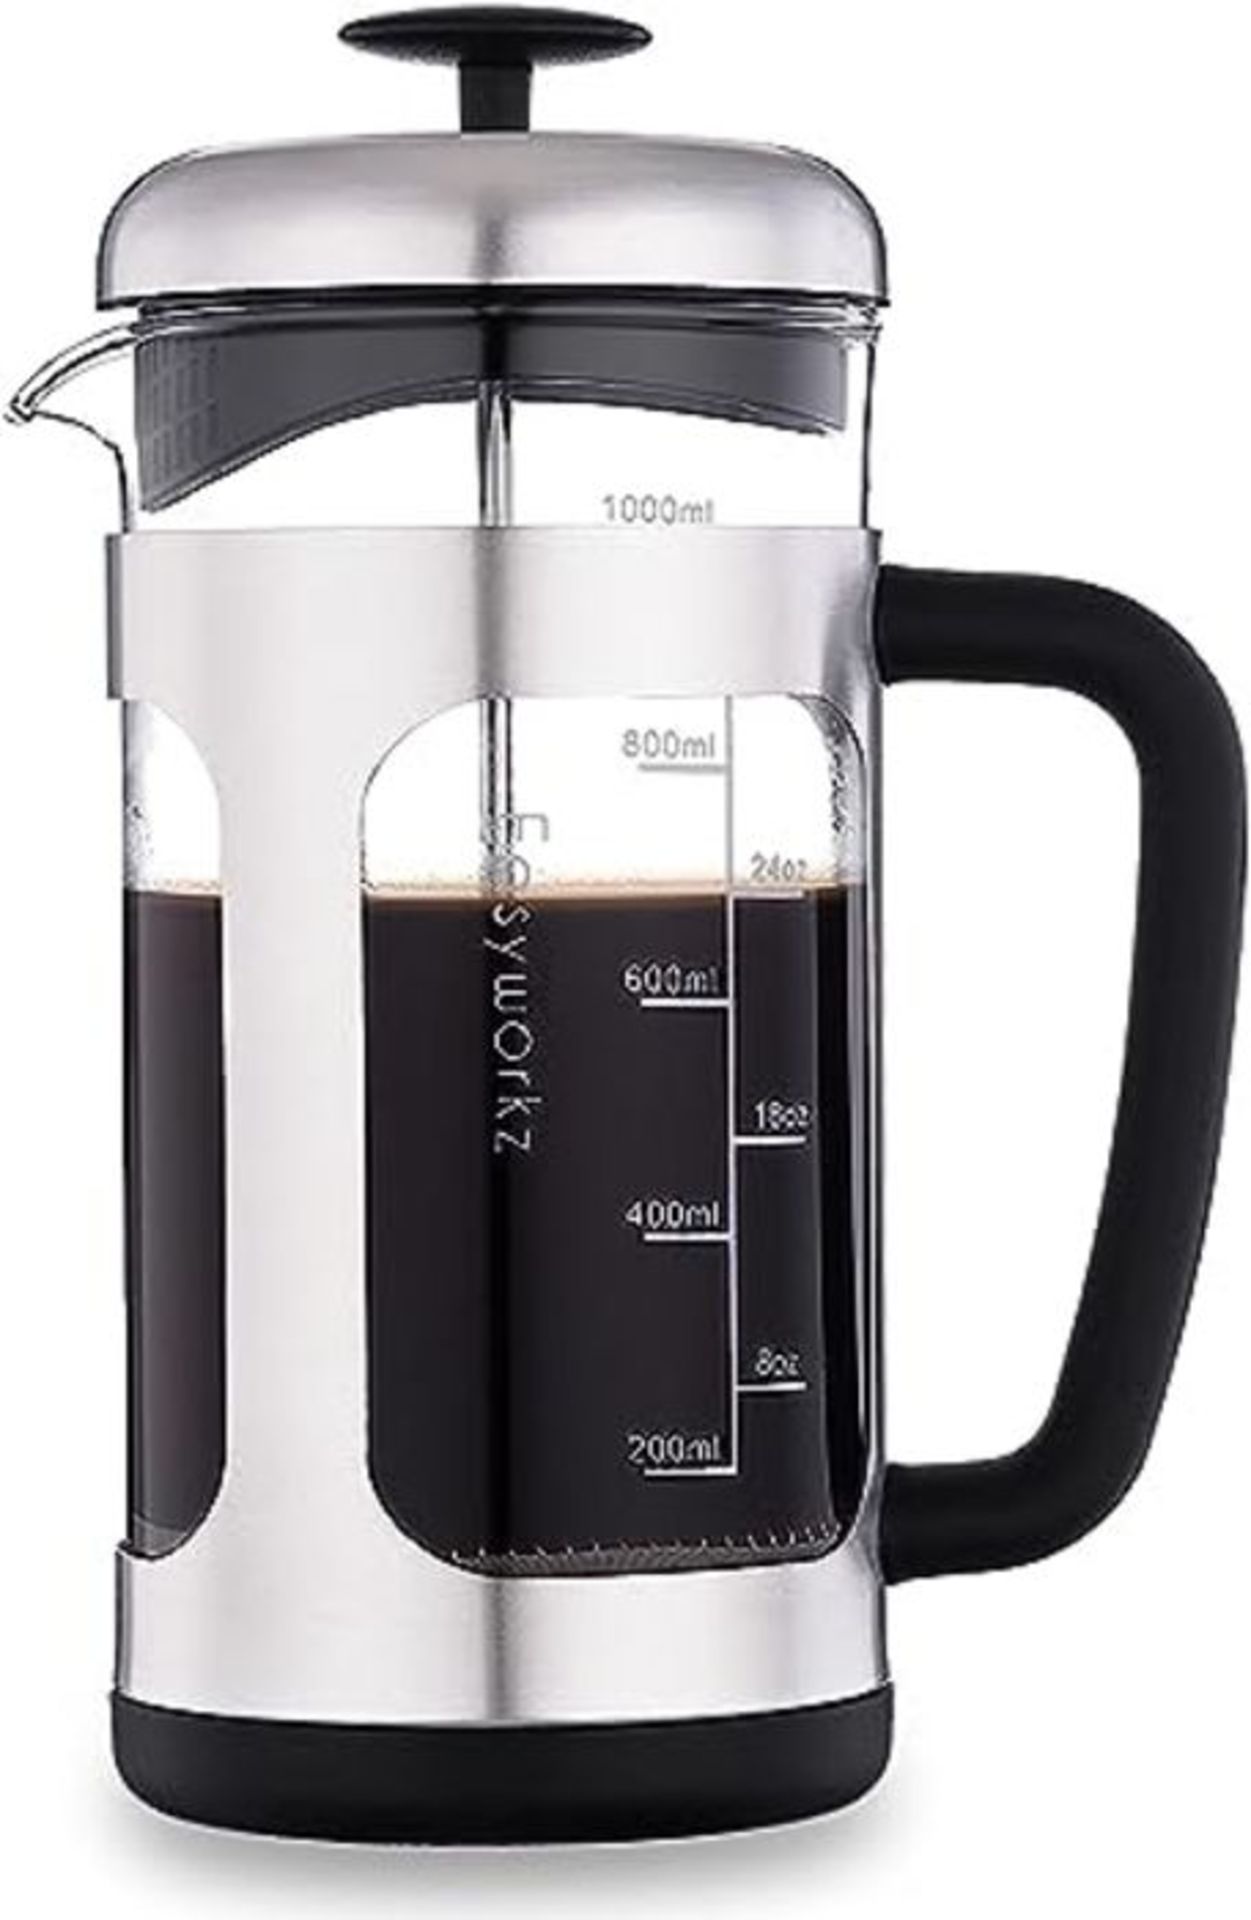 Easyworkz Stainless Steel French Press 1000ml Coffee Tea Maker with Soft Grip Handle